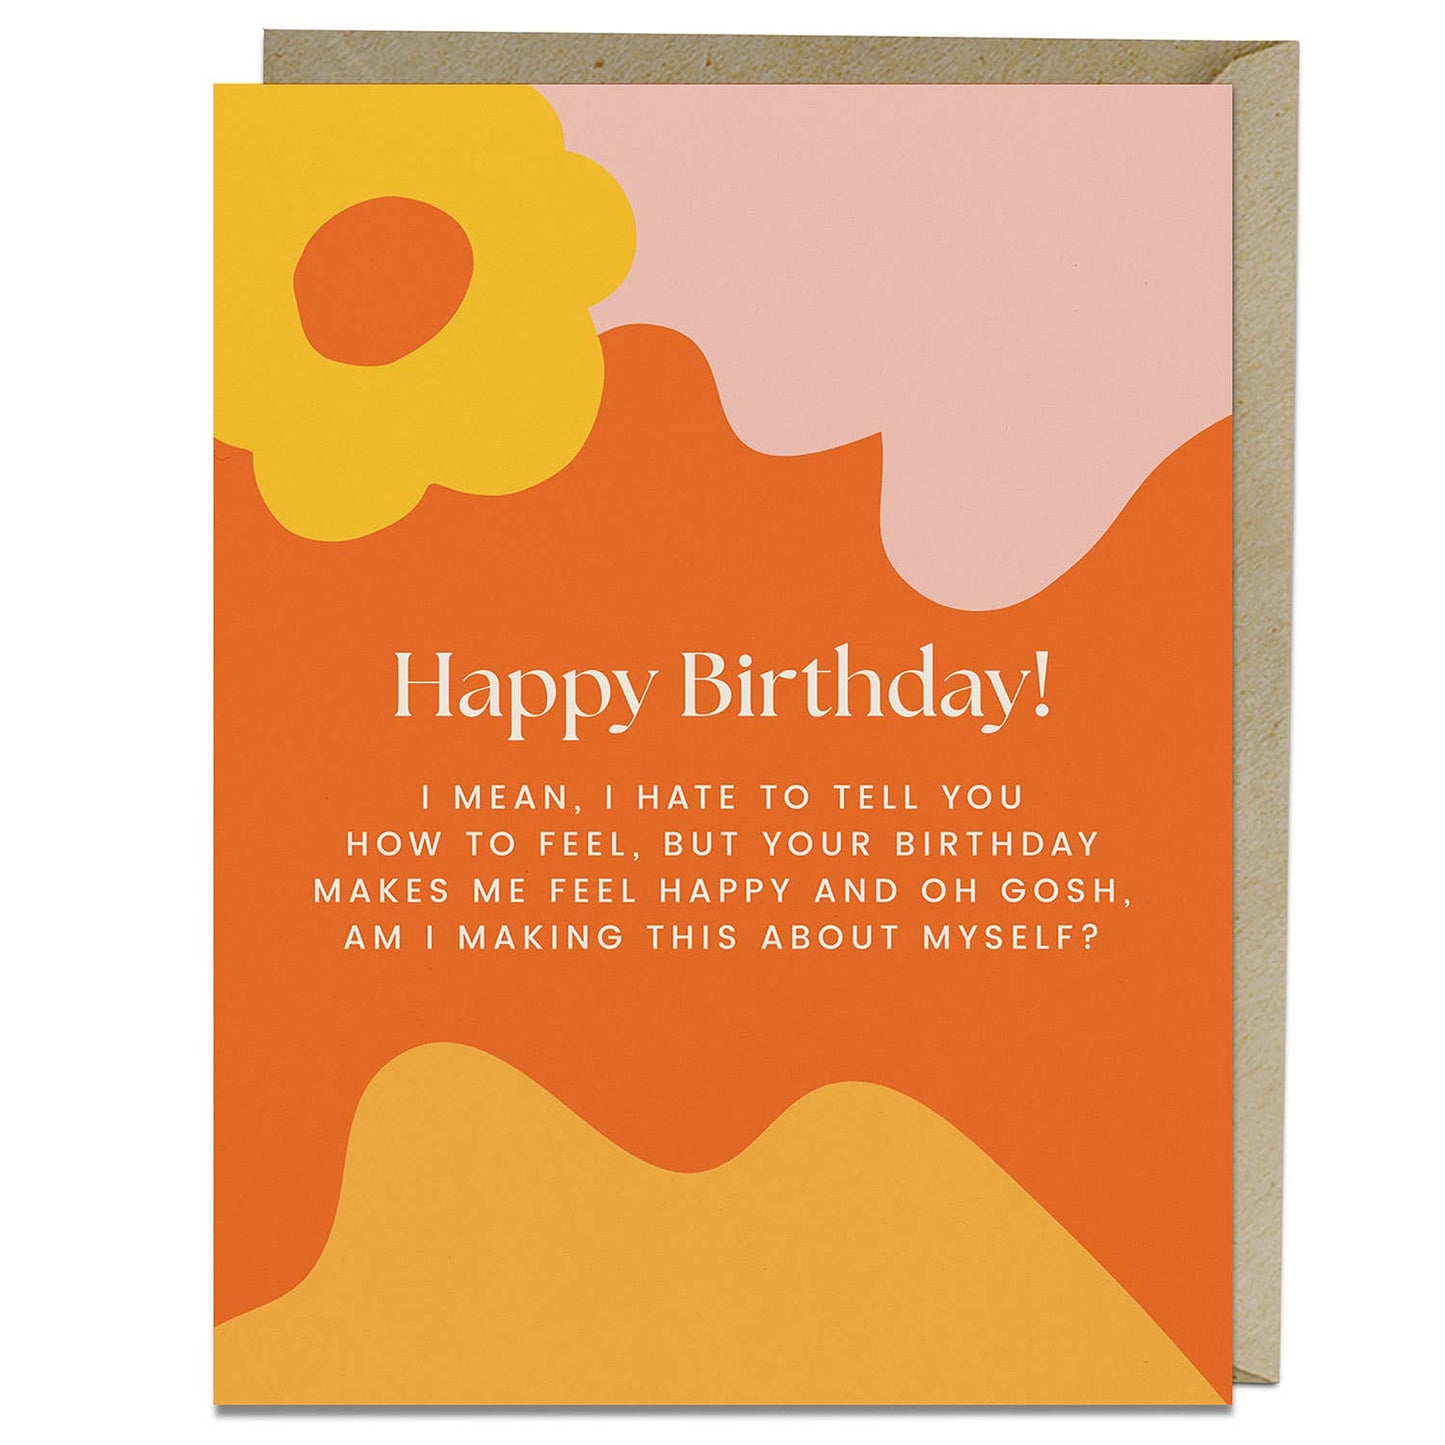 Your Birthday Makes Me Happy Card